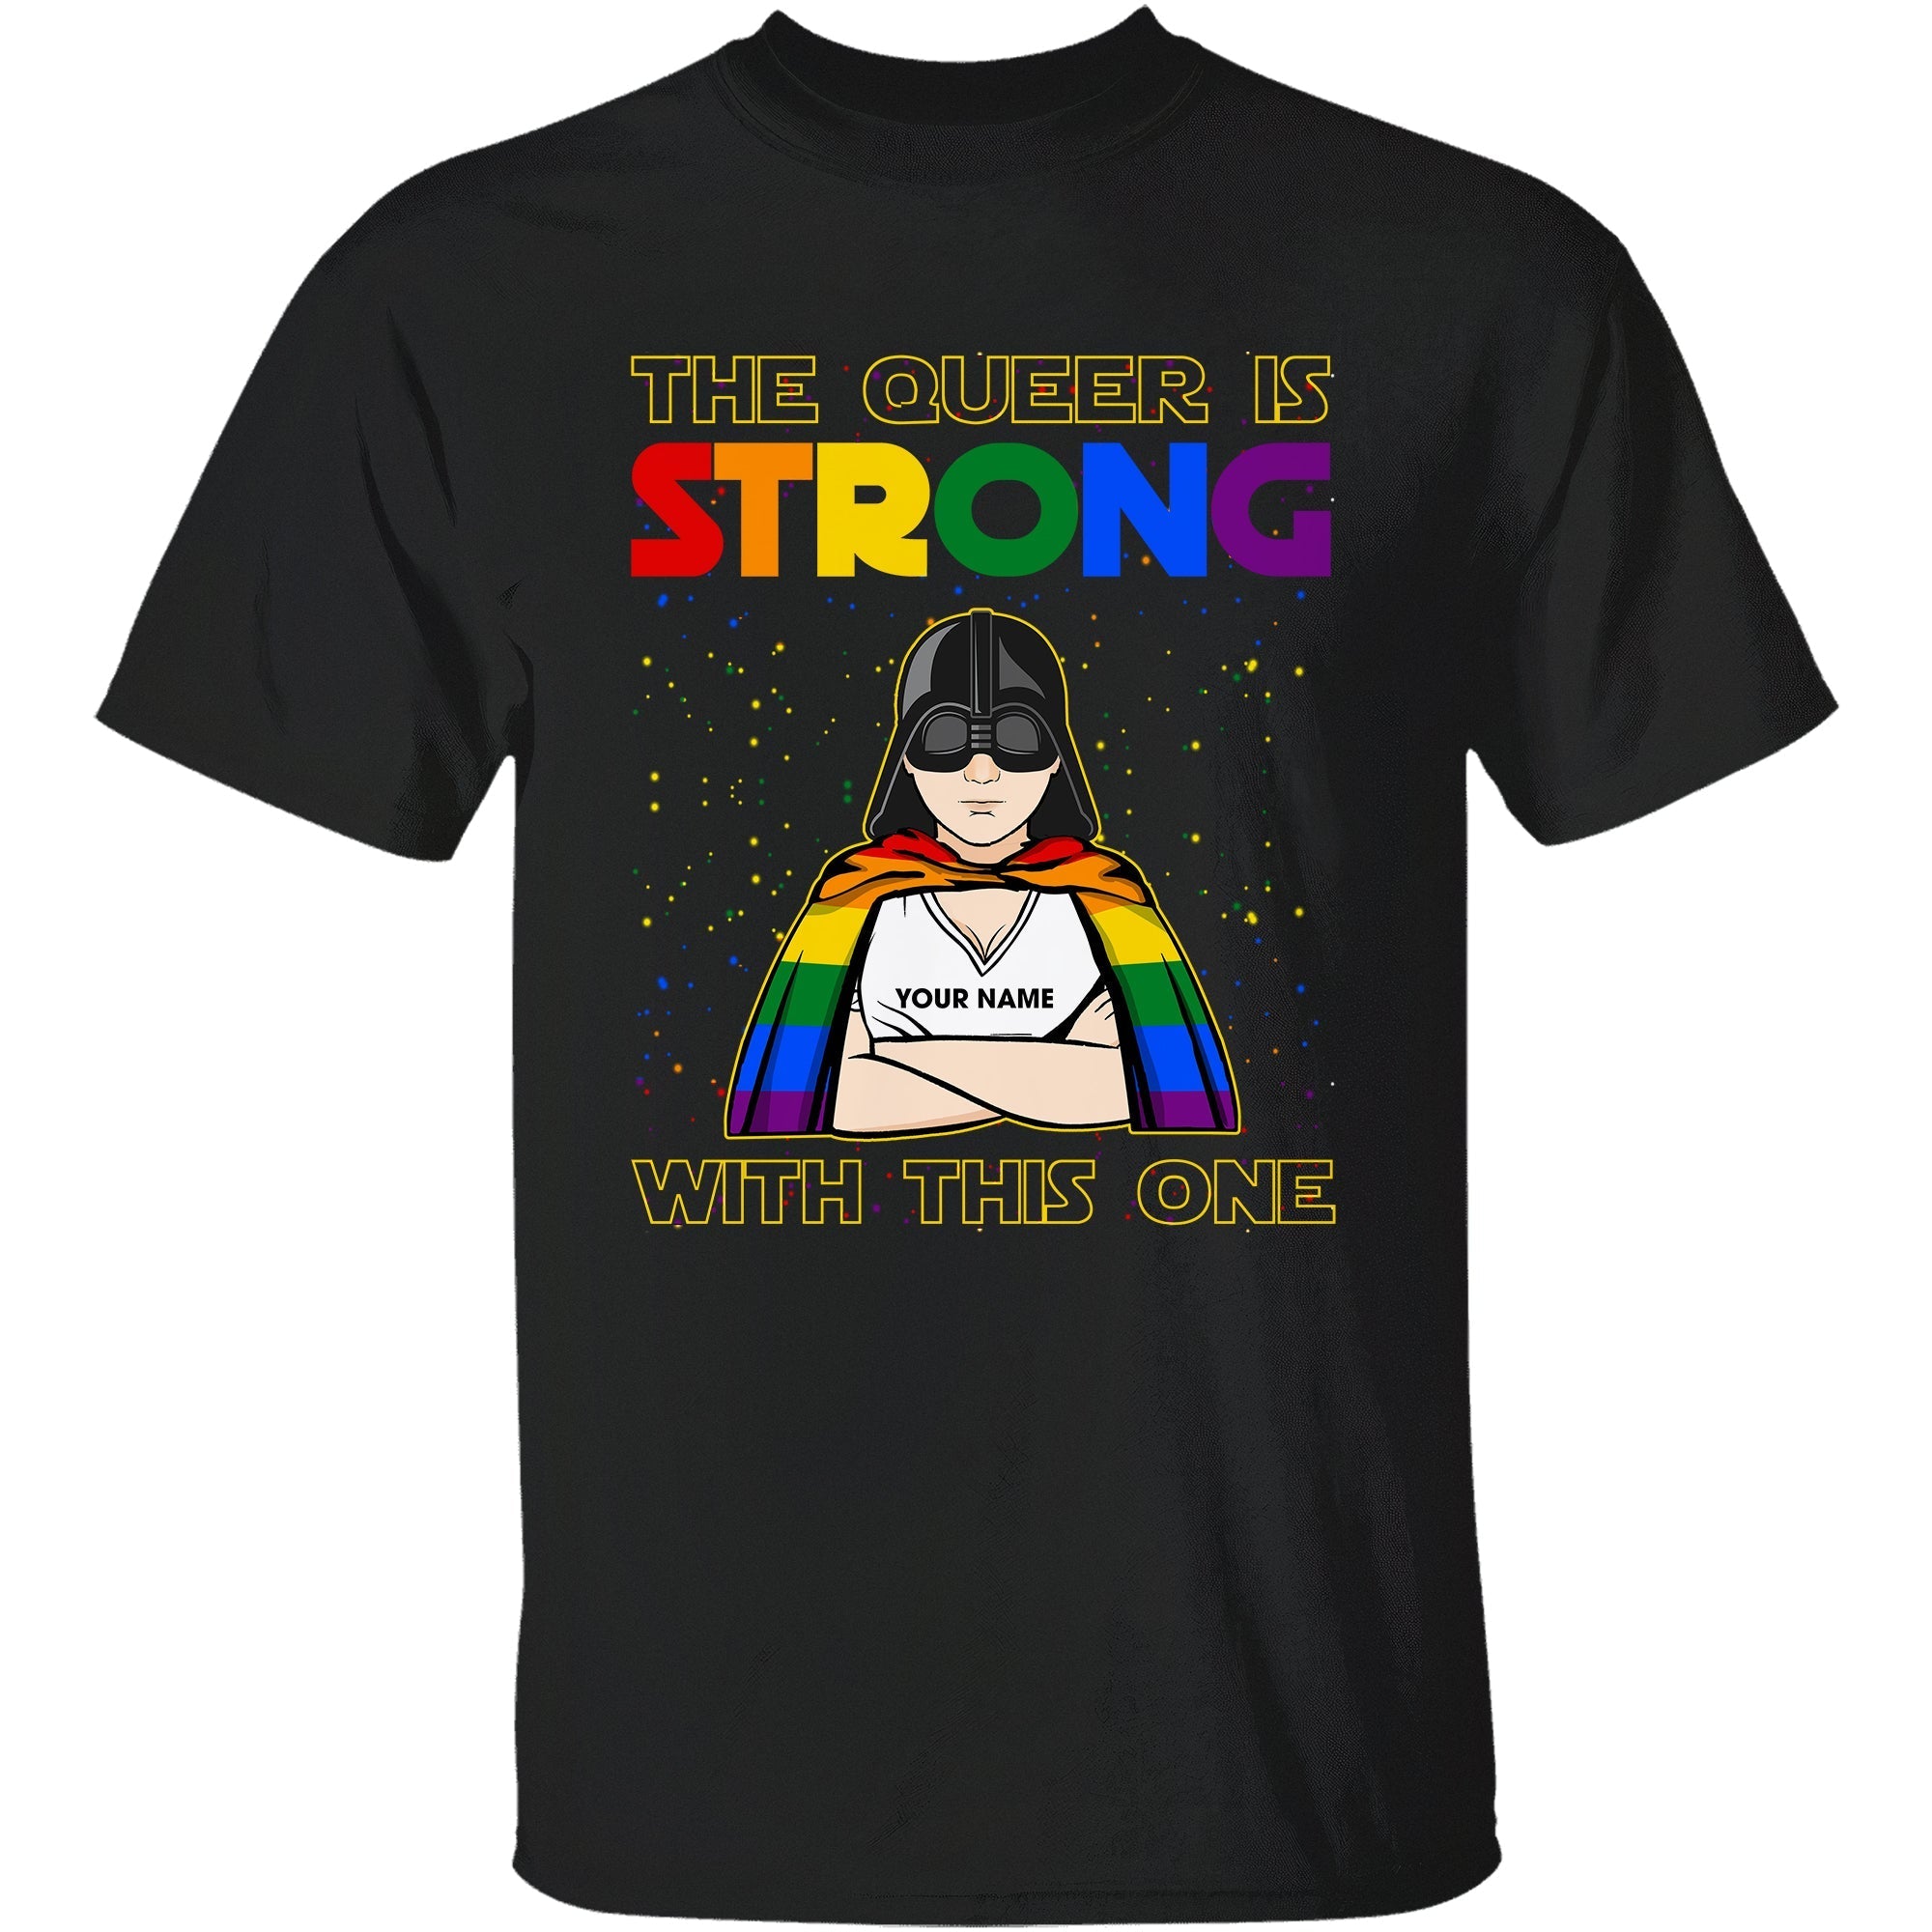 Personalized T Shirt For Queer/ Pride Month Custom Shirt/ The Queer Is Strong/ LGBT Custom Shirt